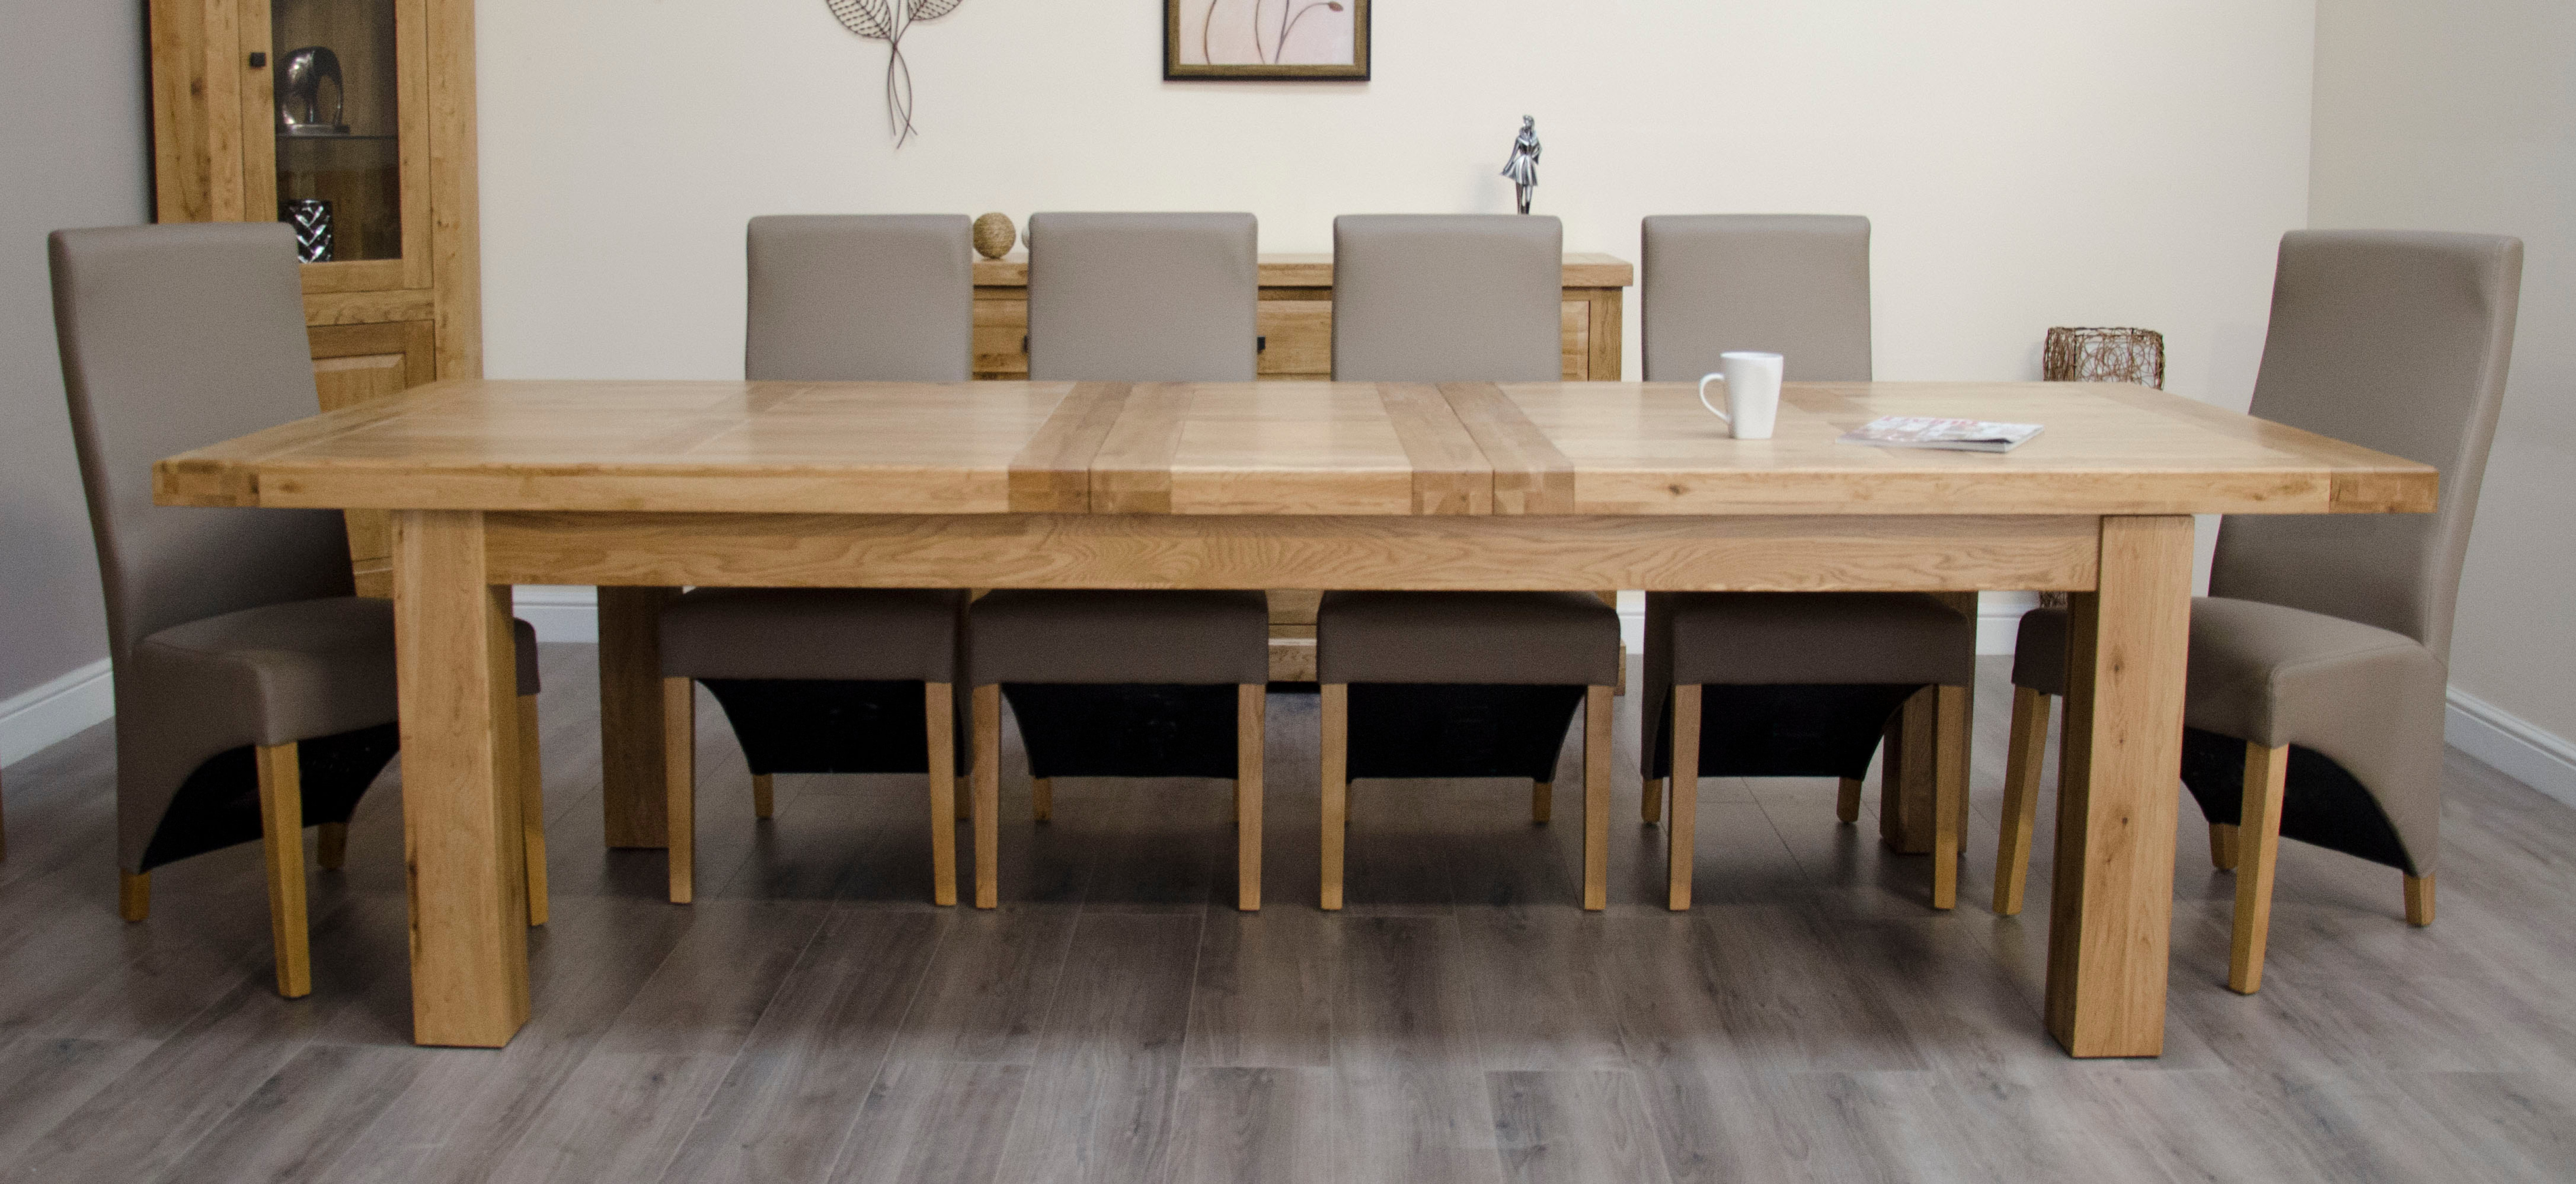 Extra Large Wood Dining Room Table